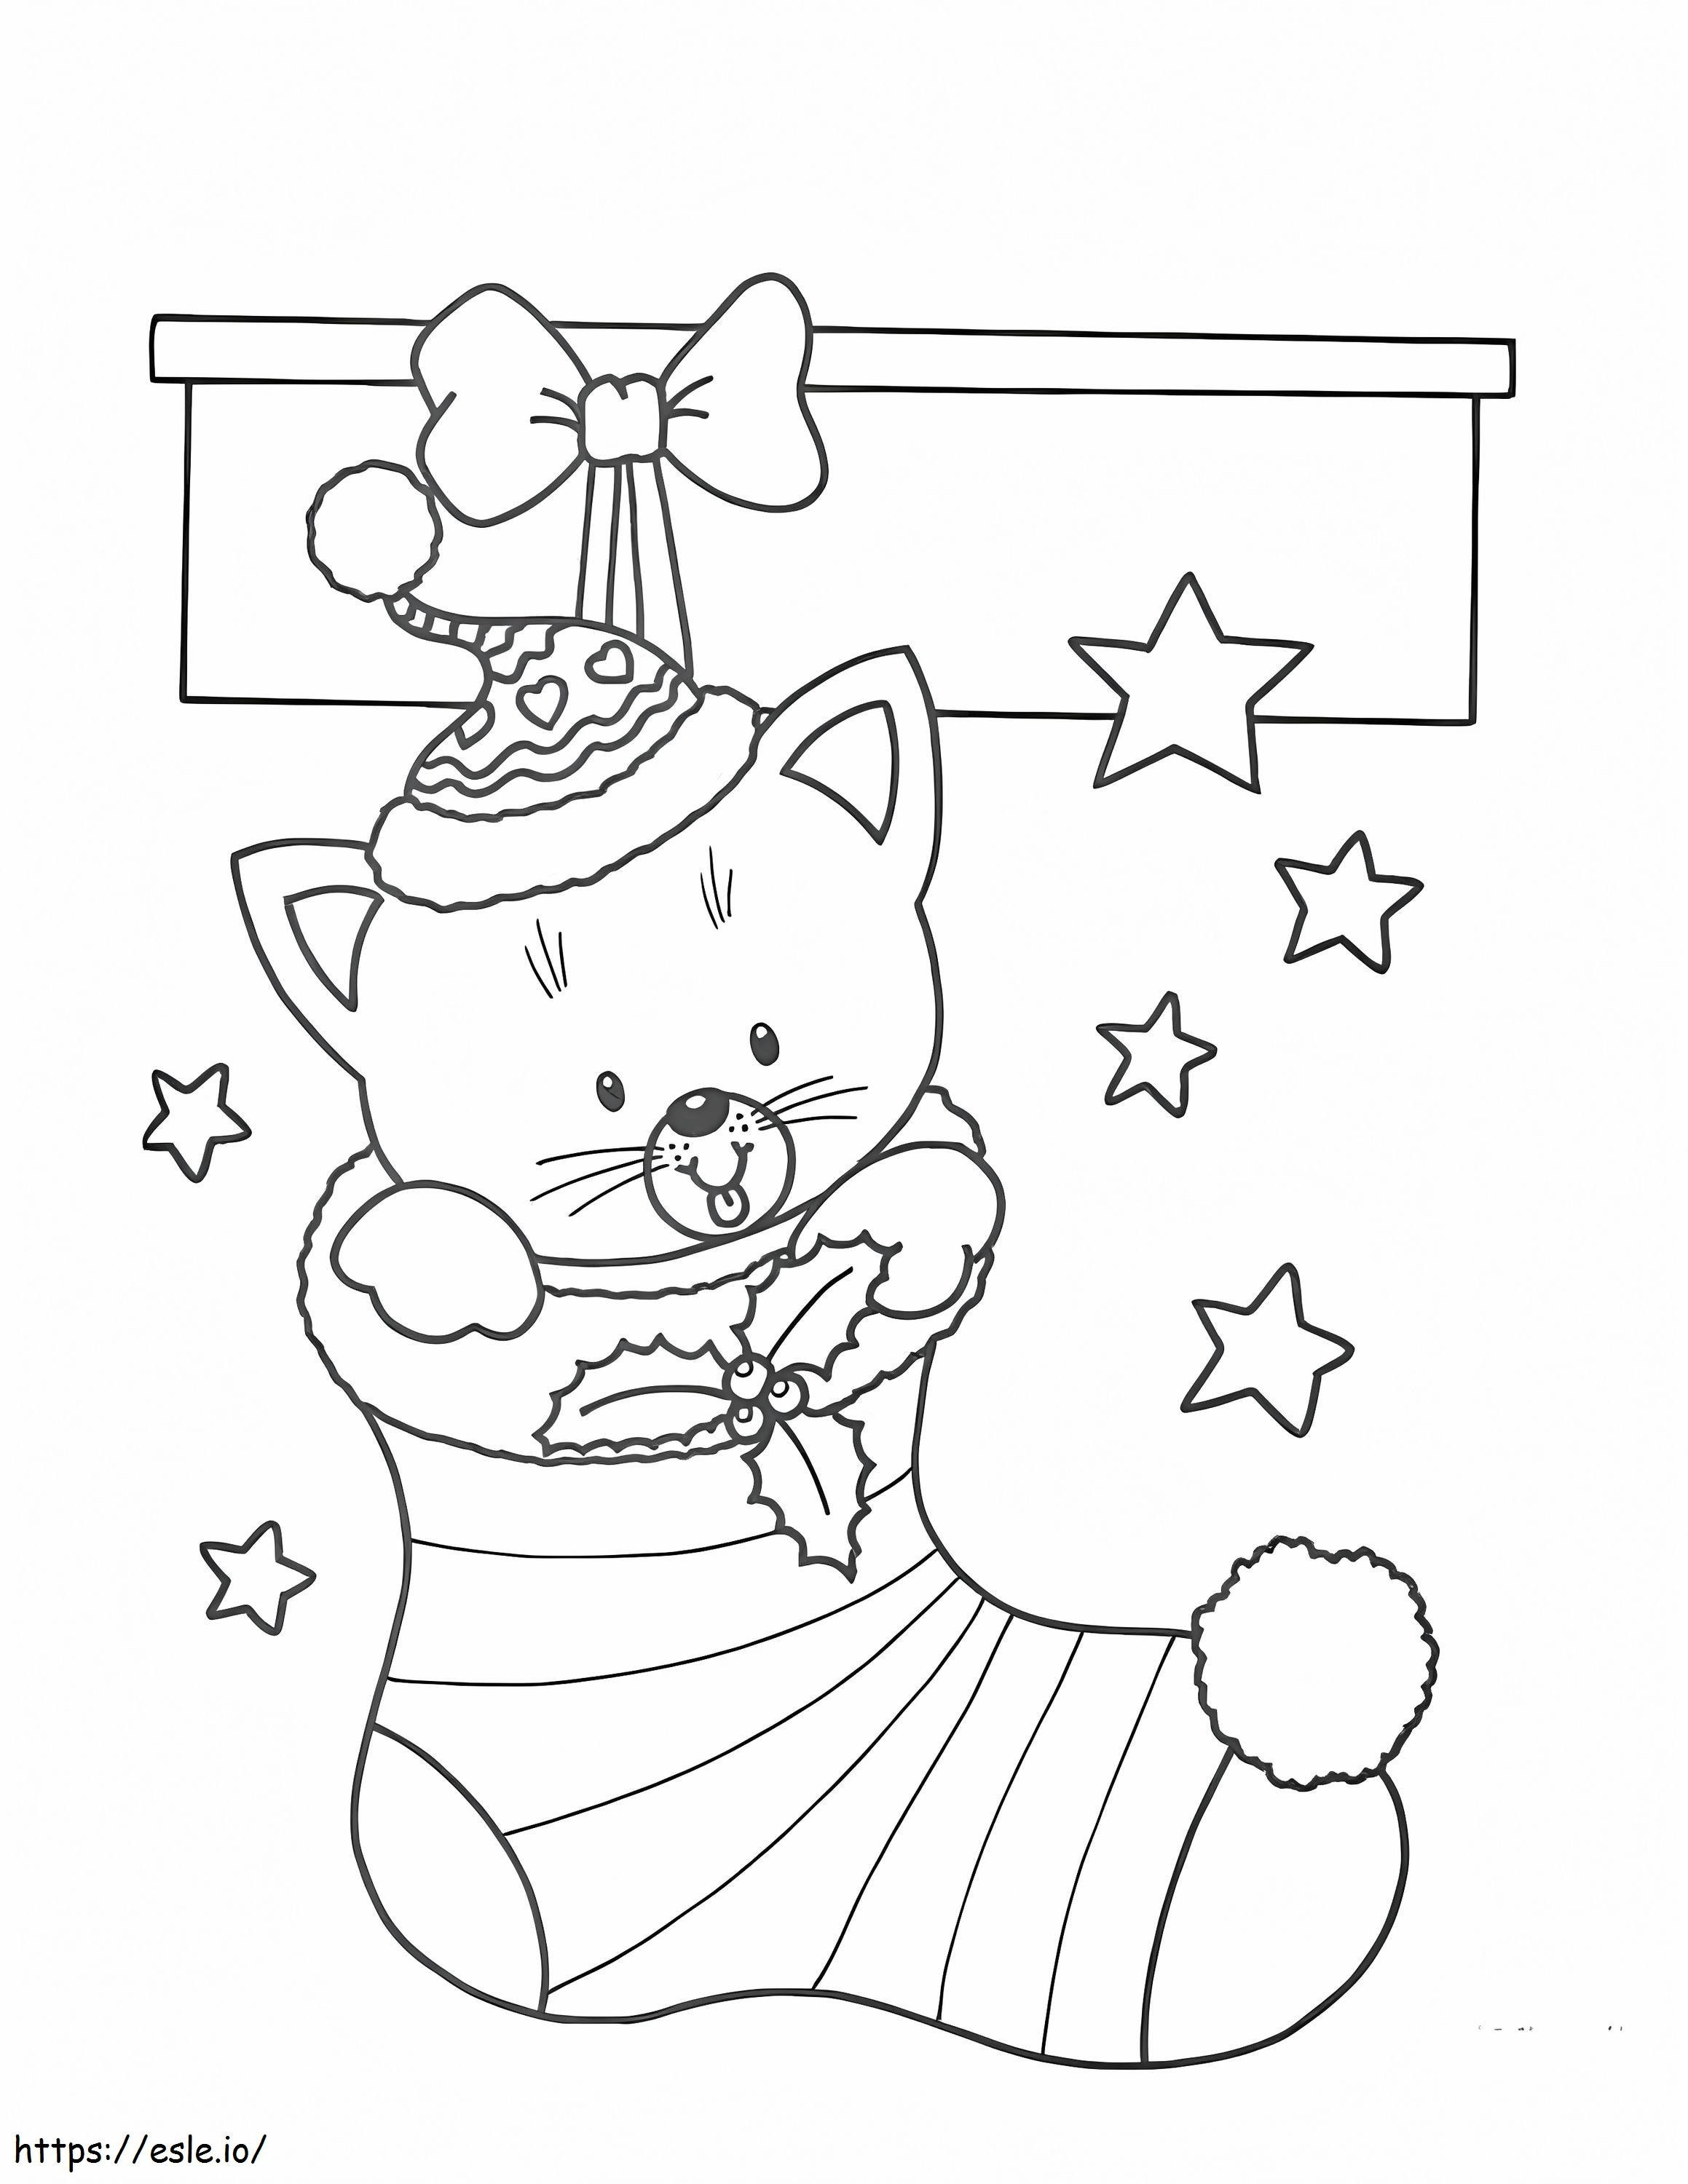 Kitten In Christmas Stocking coloring page